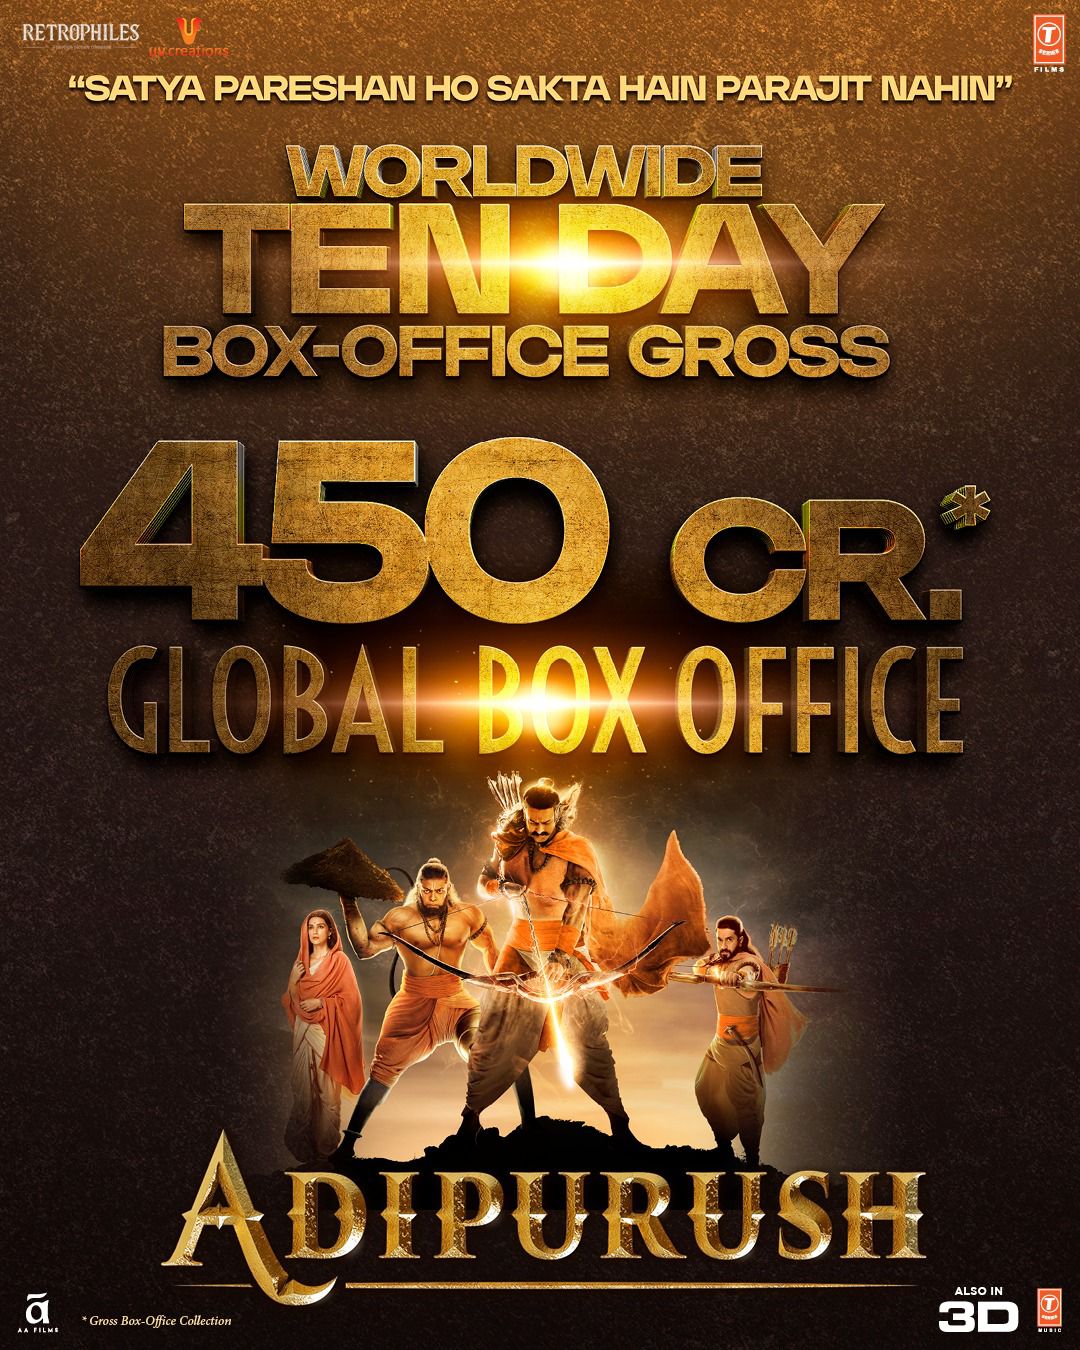 Adipurush Picks Up Strong Pace At The Box Office, Earns Rs 450 Crores Globally in 10 Days